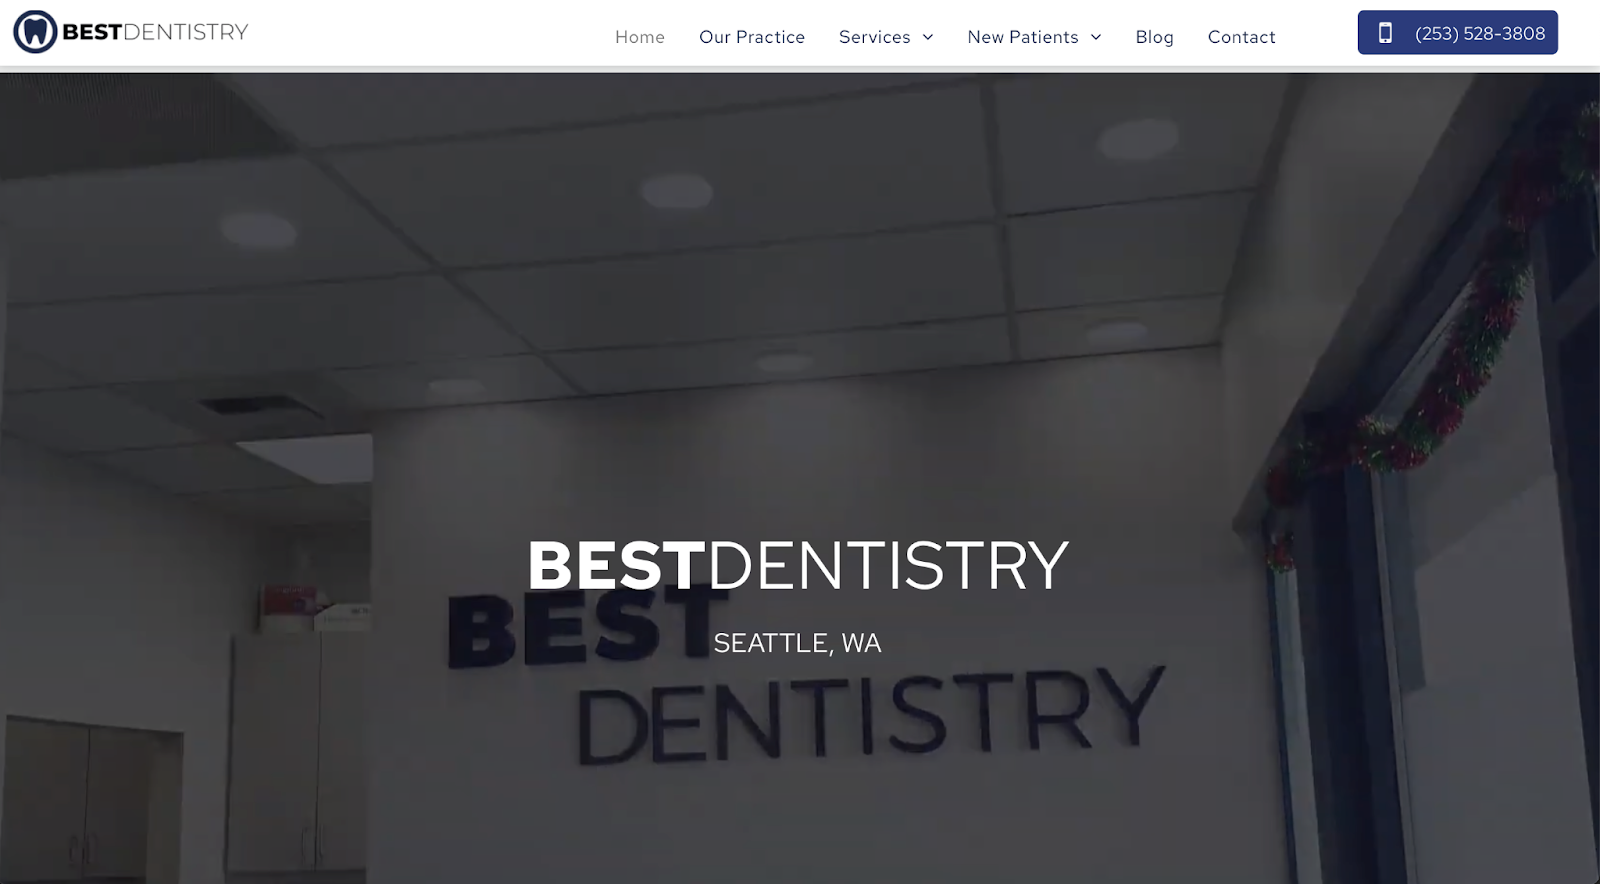 Communicate your brand across your in person and digital experiences, such as the Best Dentistry dental website